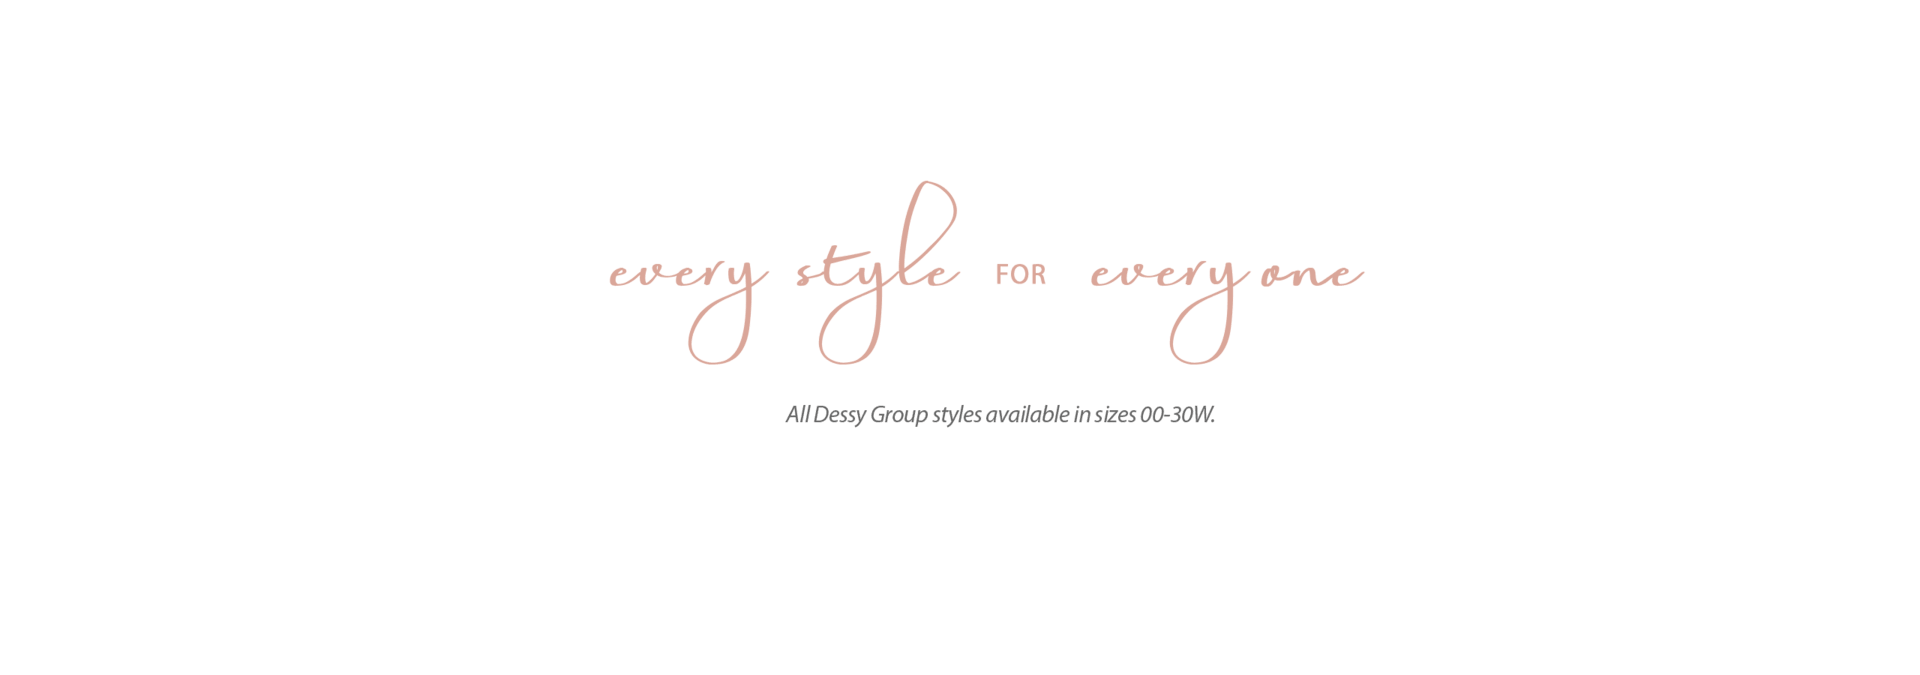 Every Style for Everyone - All Dessy dresses available in size 00-30W